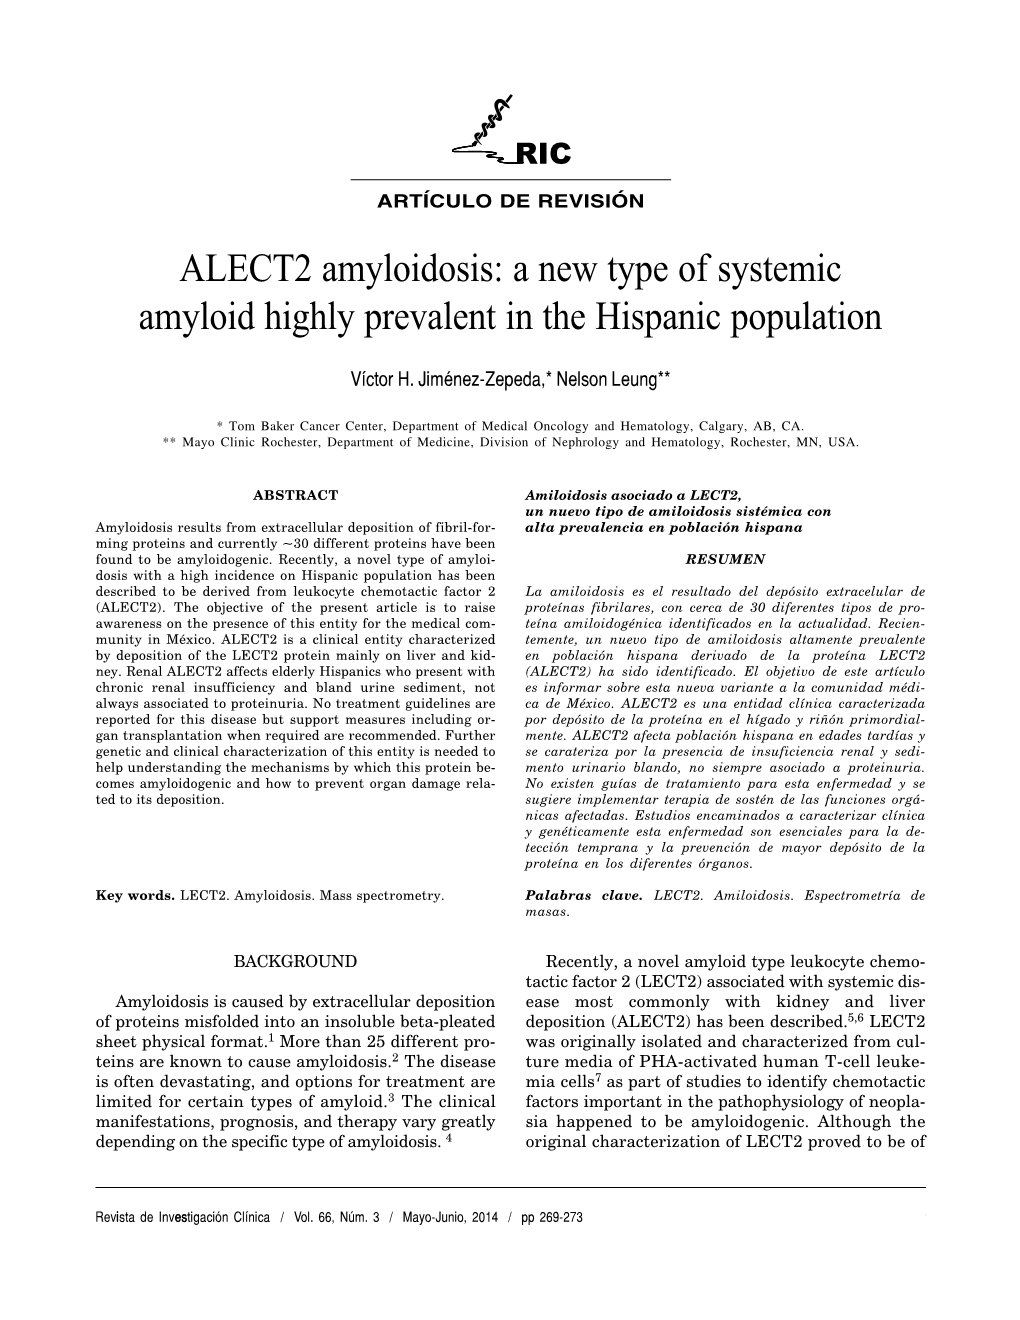 ALECT2 Amyloidosis: a New Type of Systemic Amyloid Highly Prevalent in the Hispanic Population